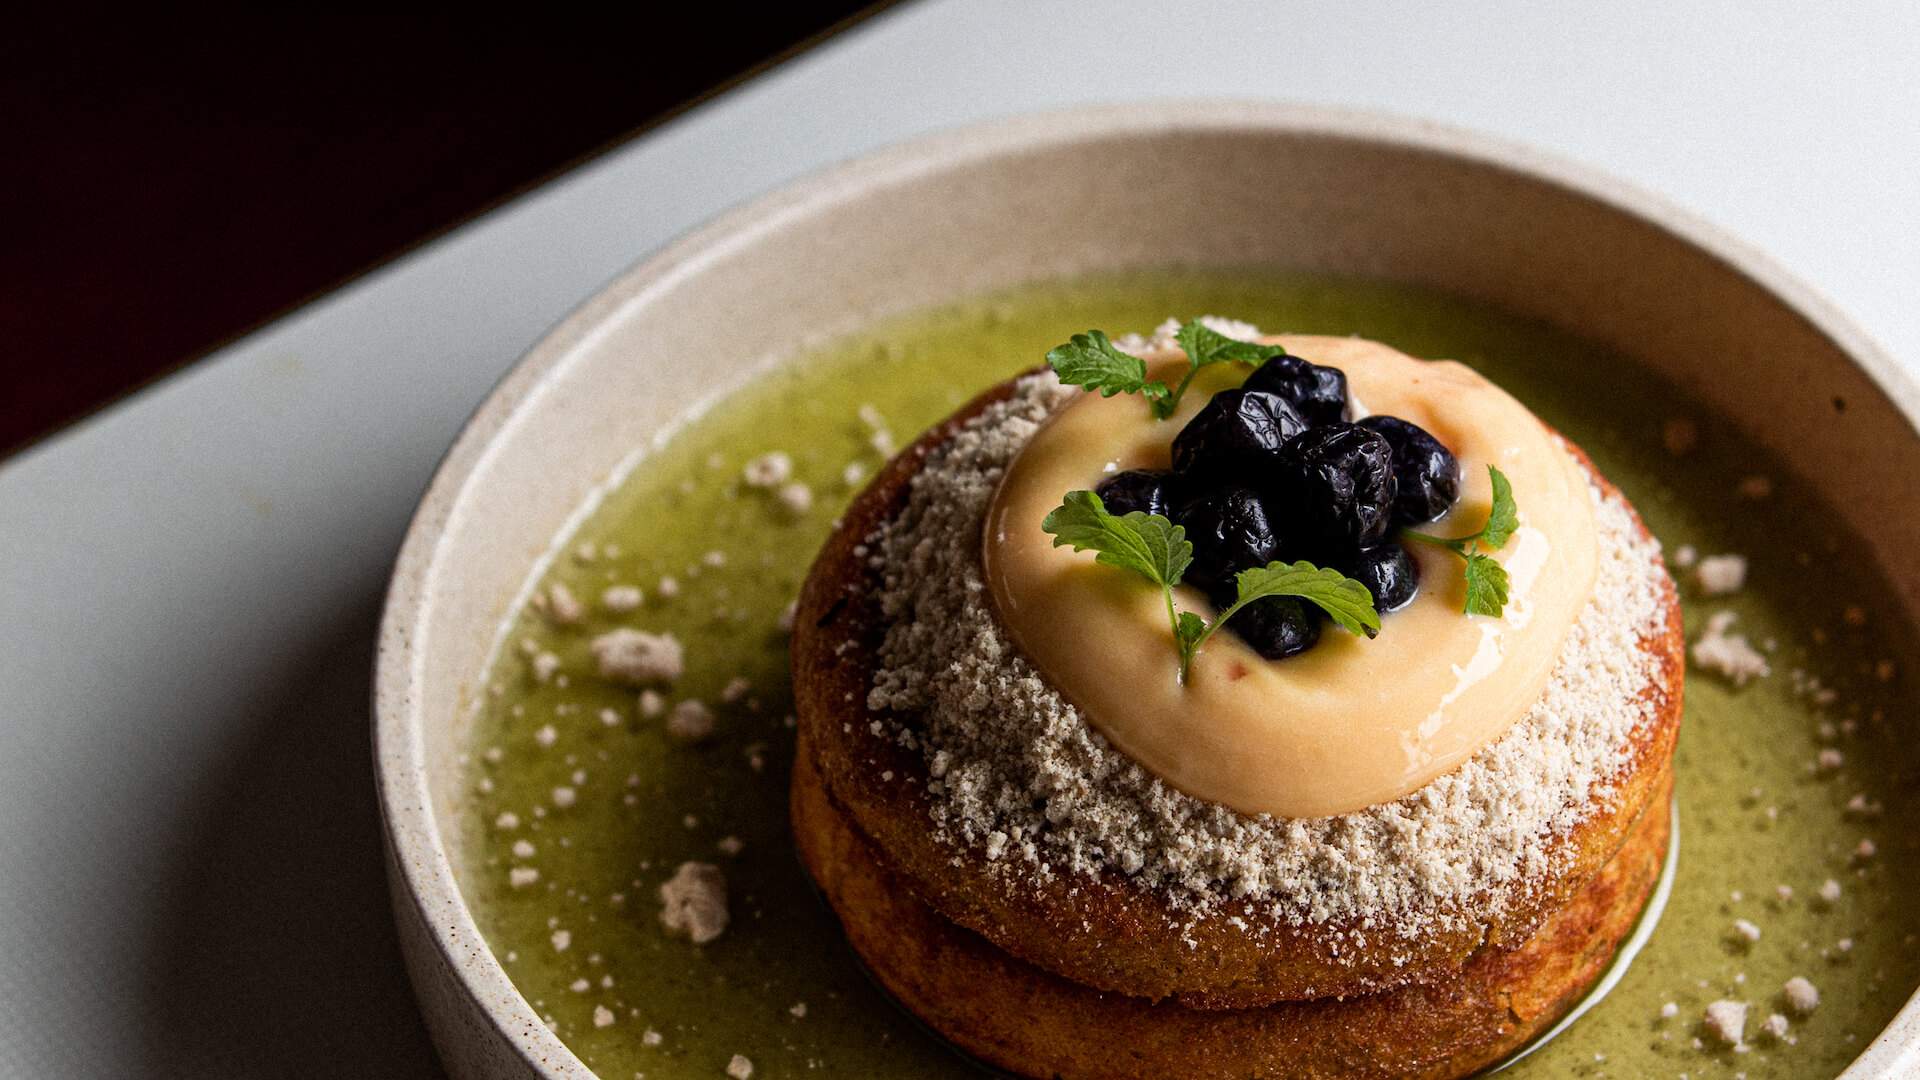 Where to Find the Best Breakfast in Melbourne